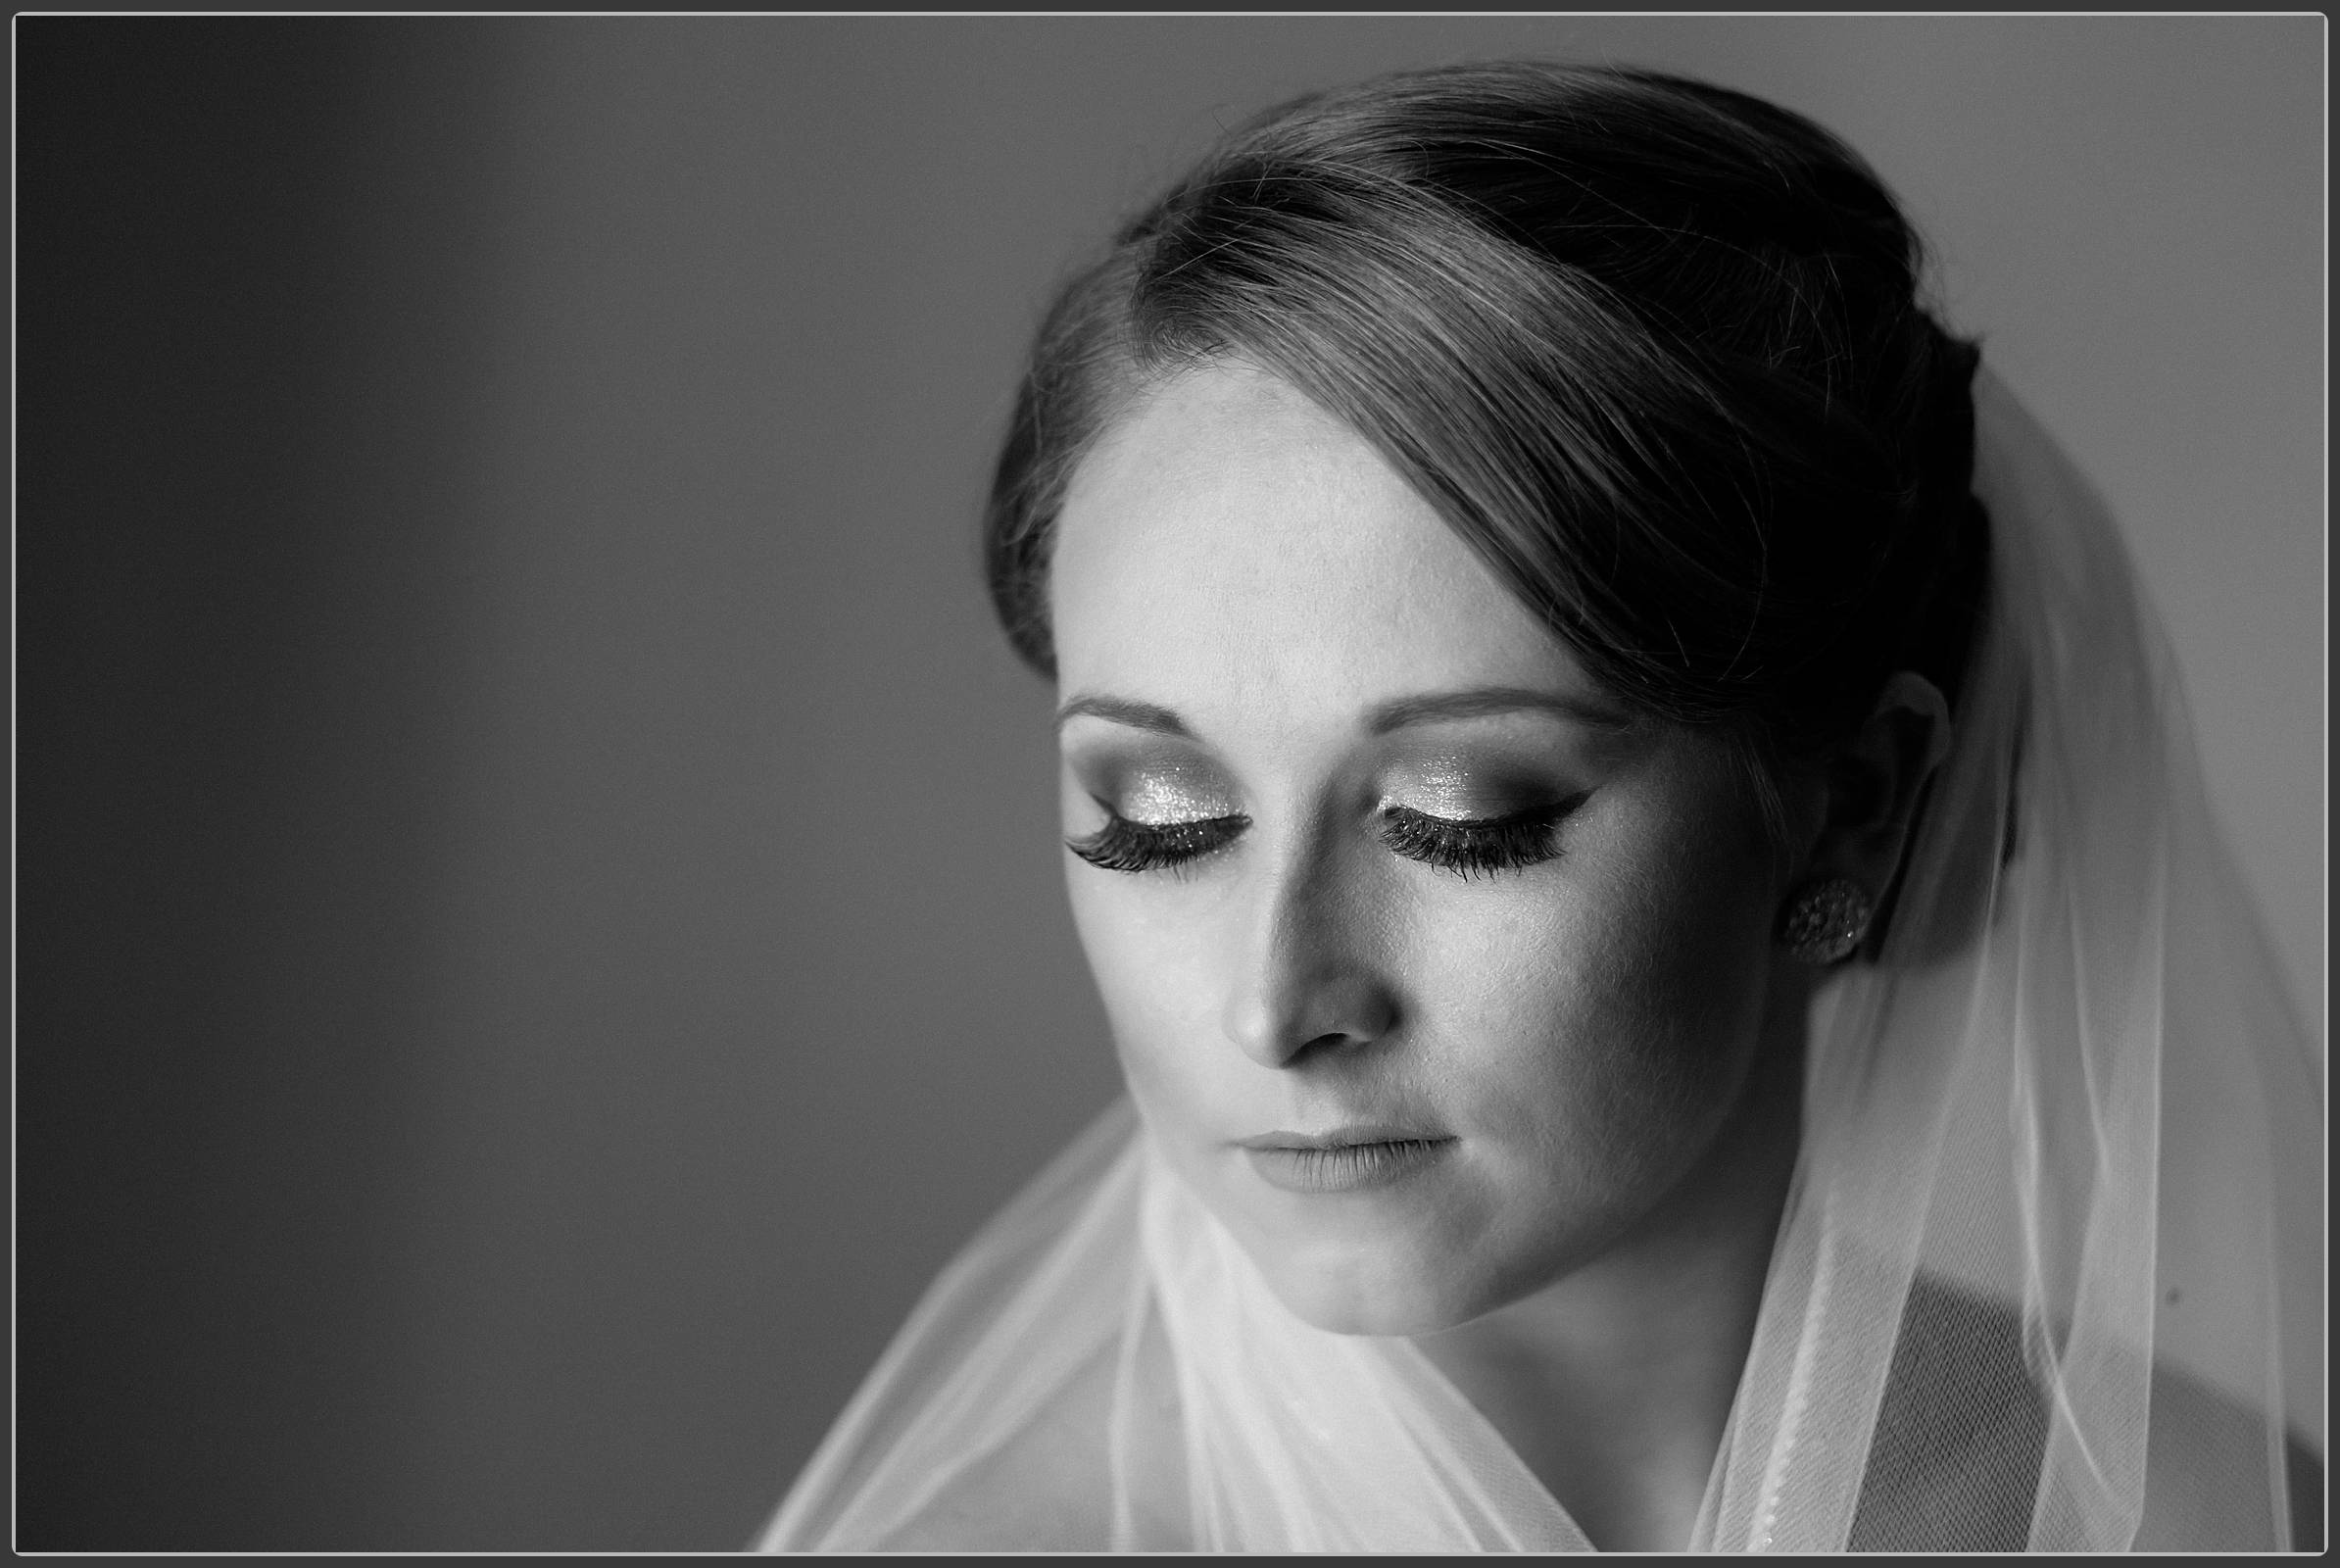 The gorgeous bride in black and white